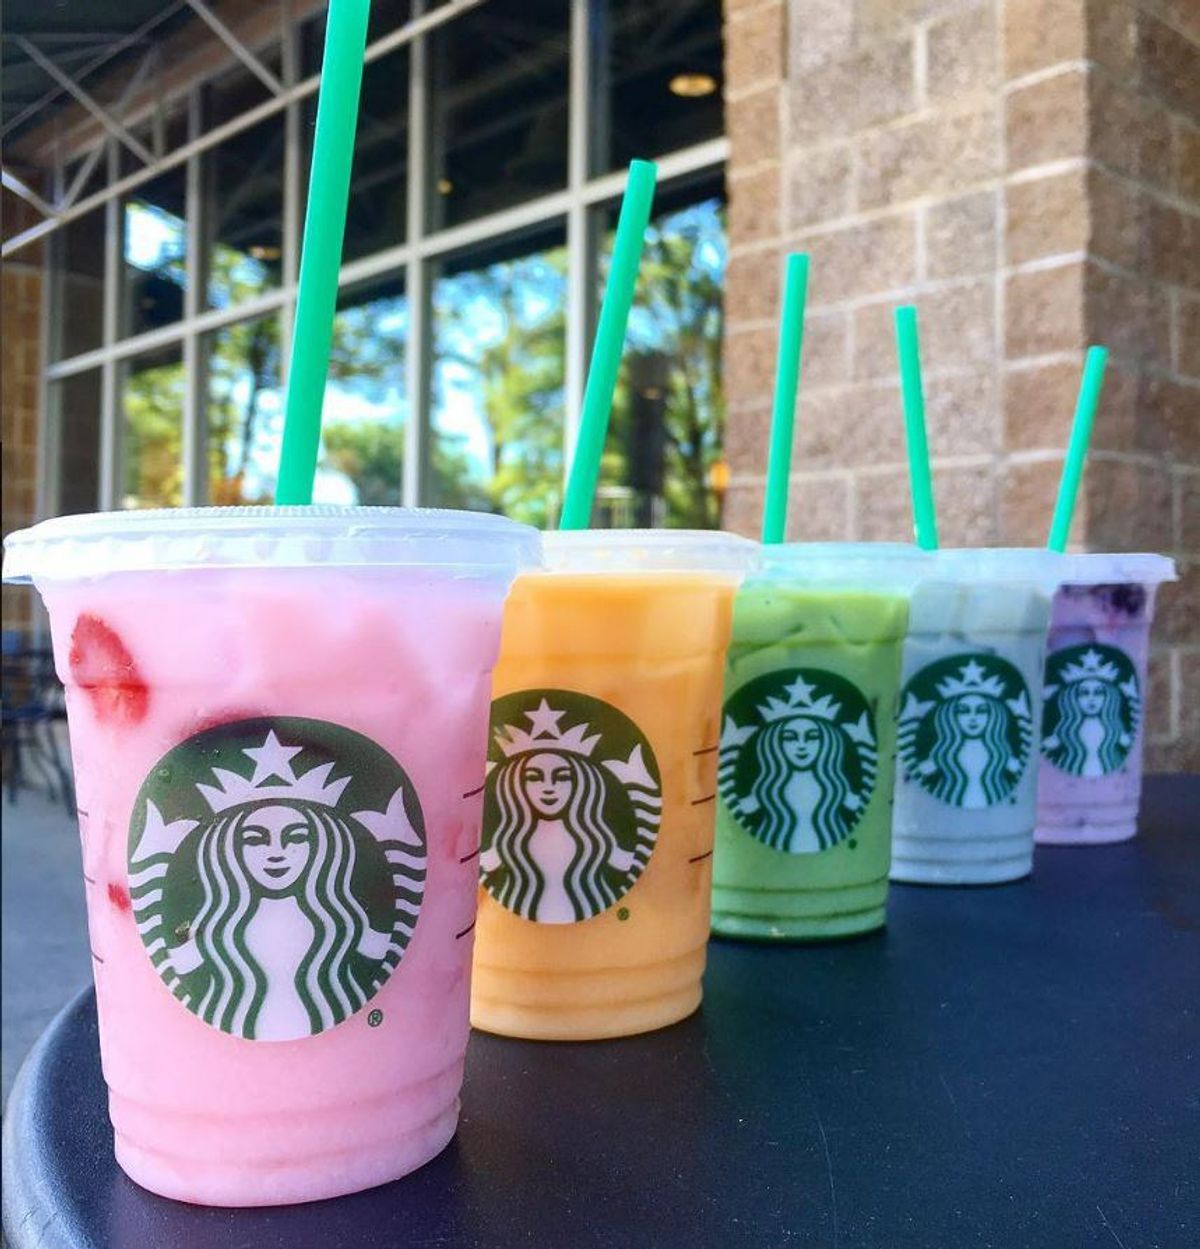 How To Order The Starbucks Rainbow Drinks, And Others From The Secret Menu